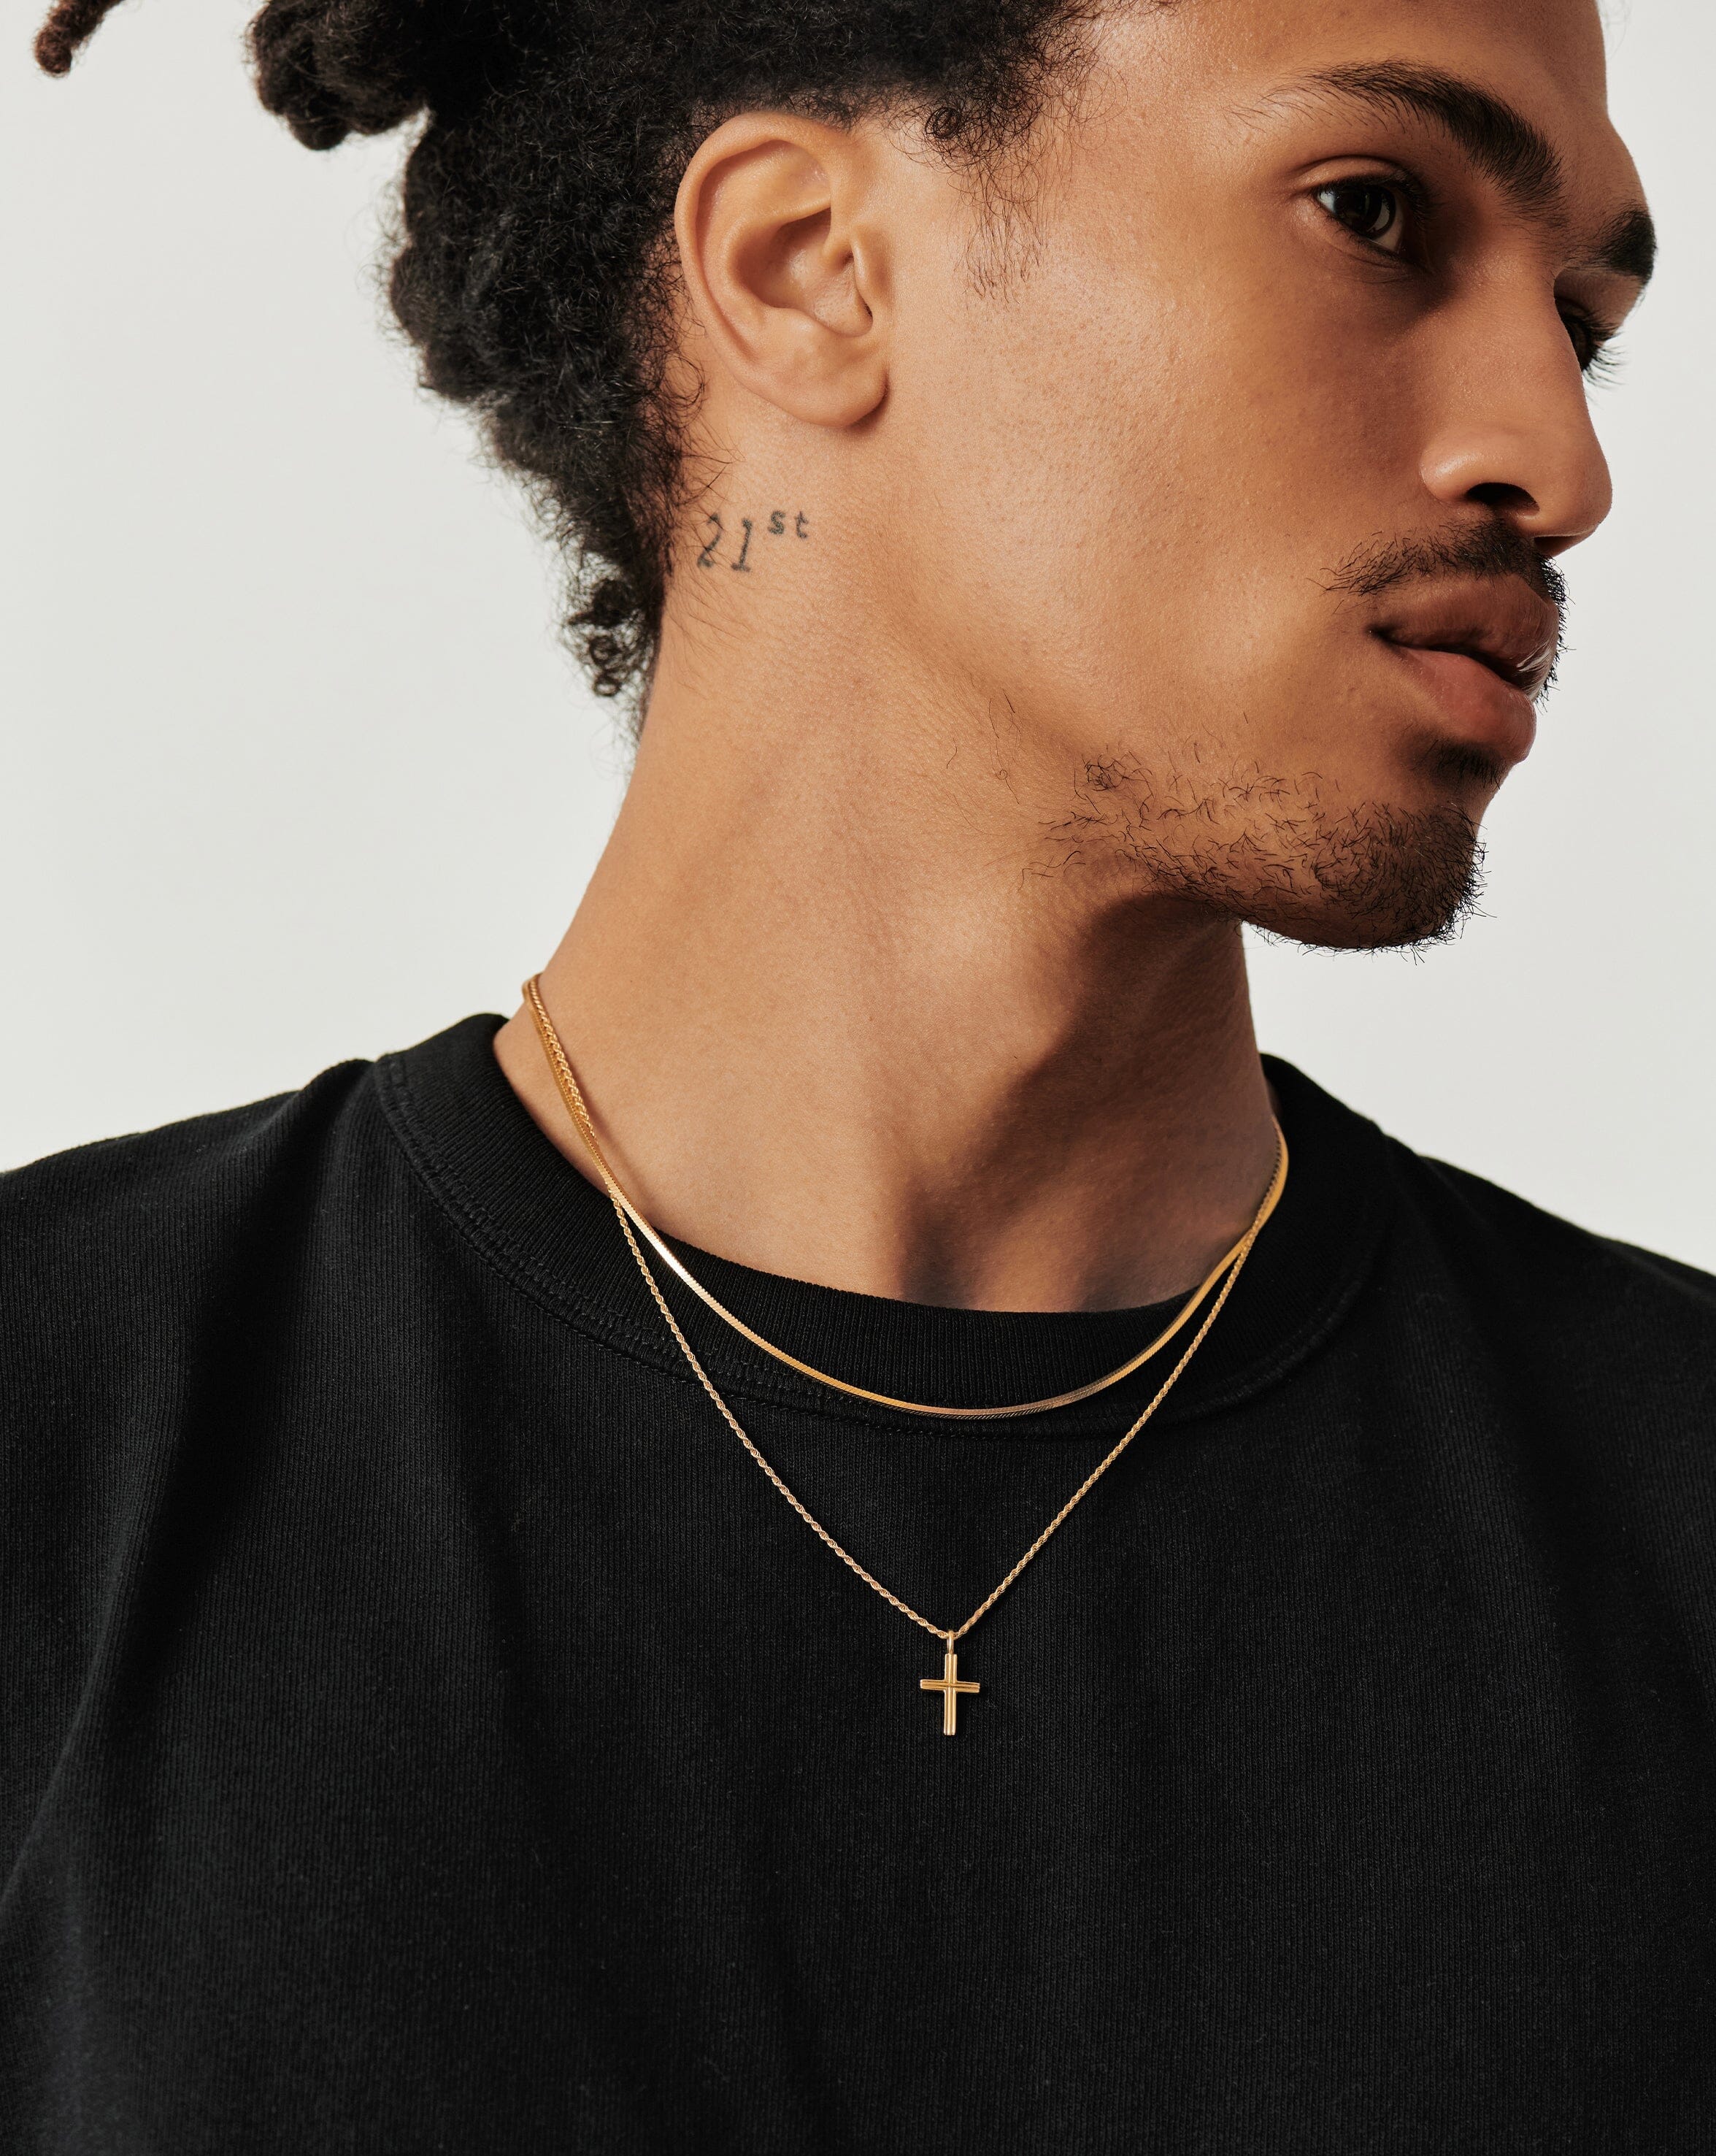 Tattoo Gold Vermeil Square Snake Chain Necklace – KKLUE